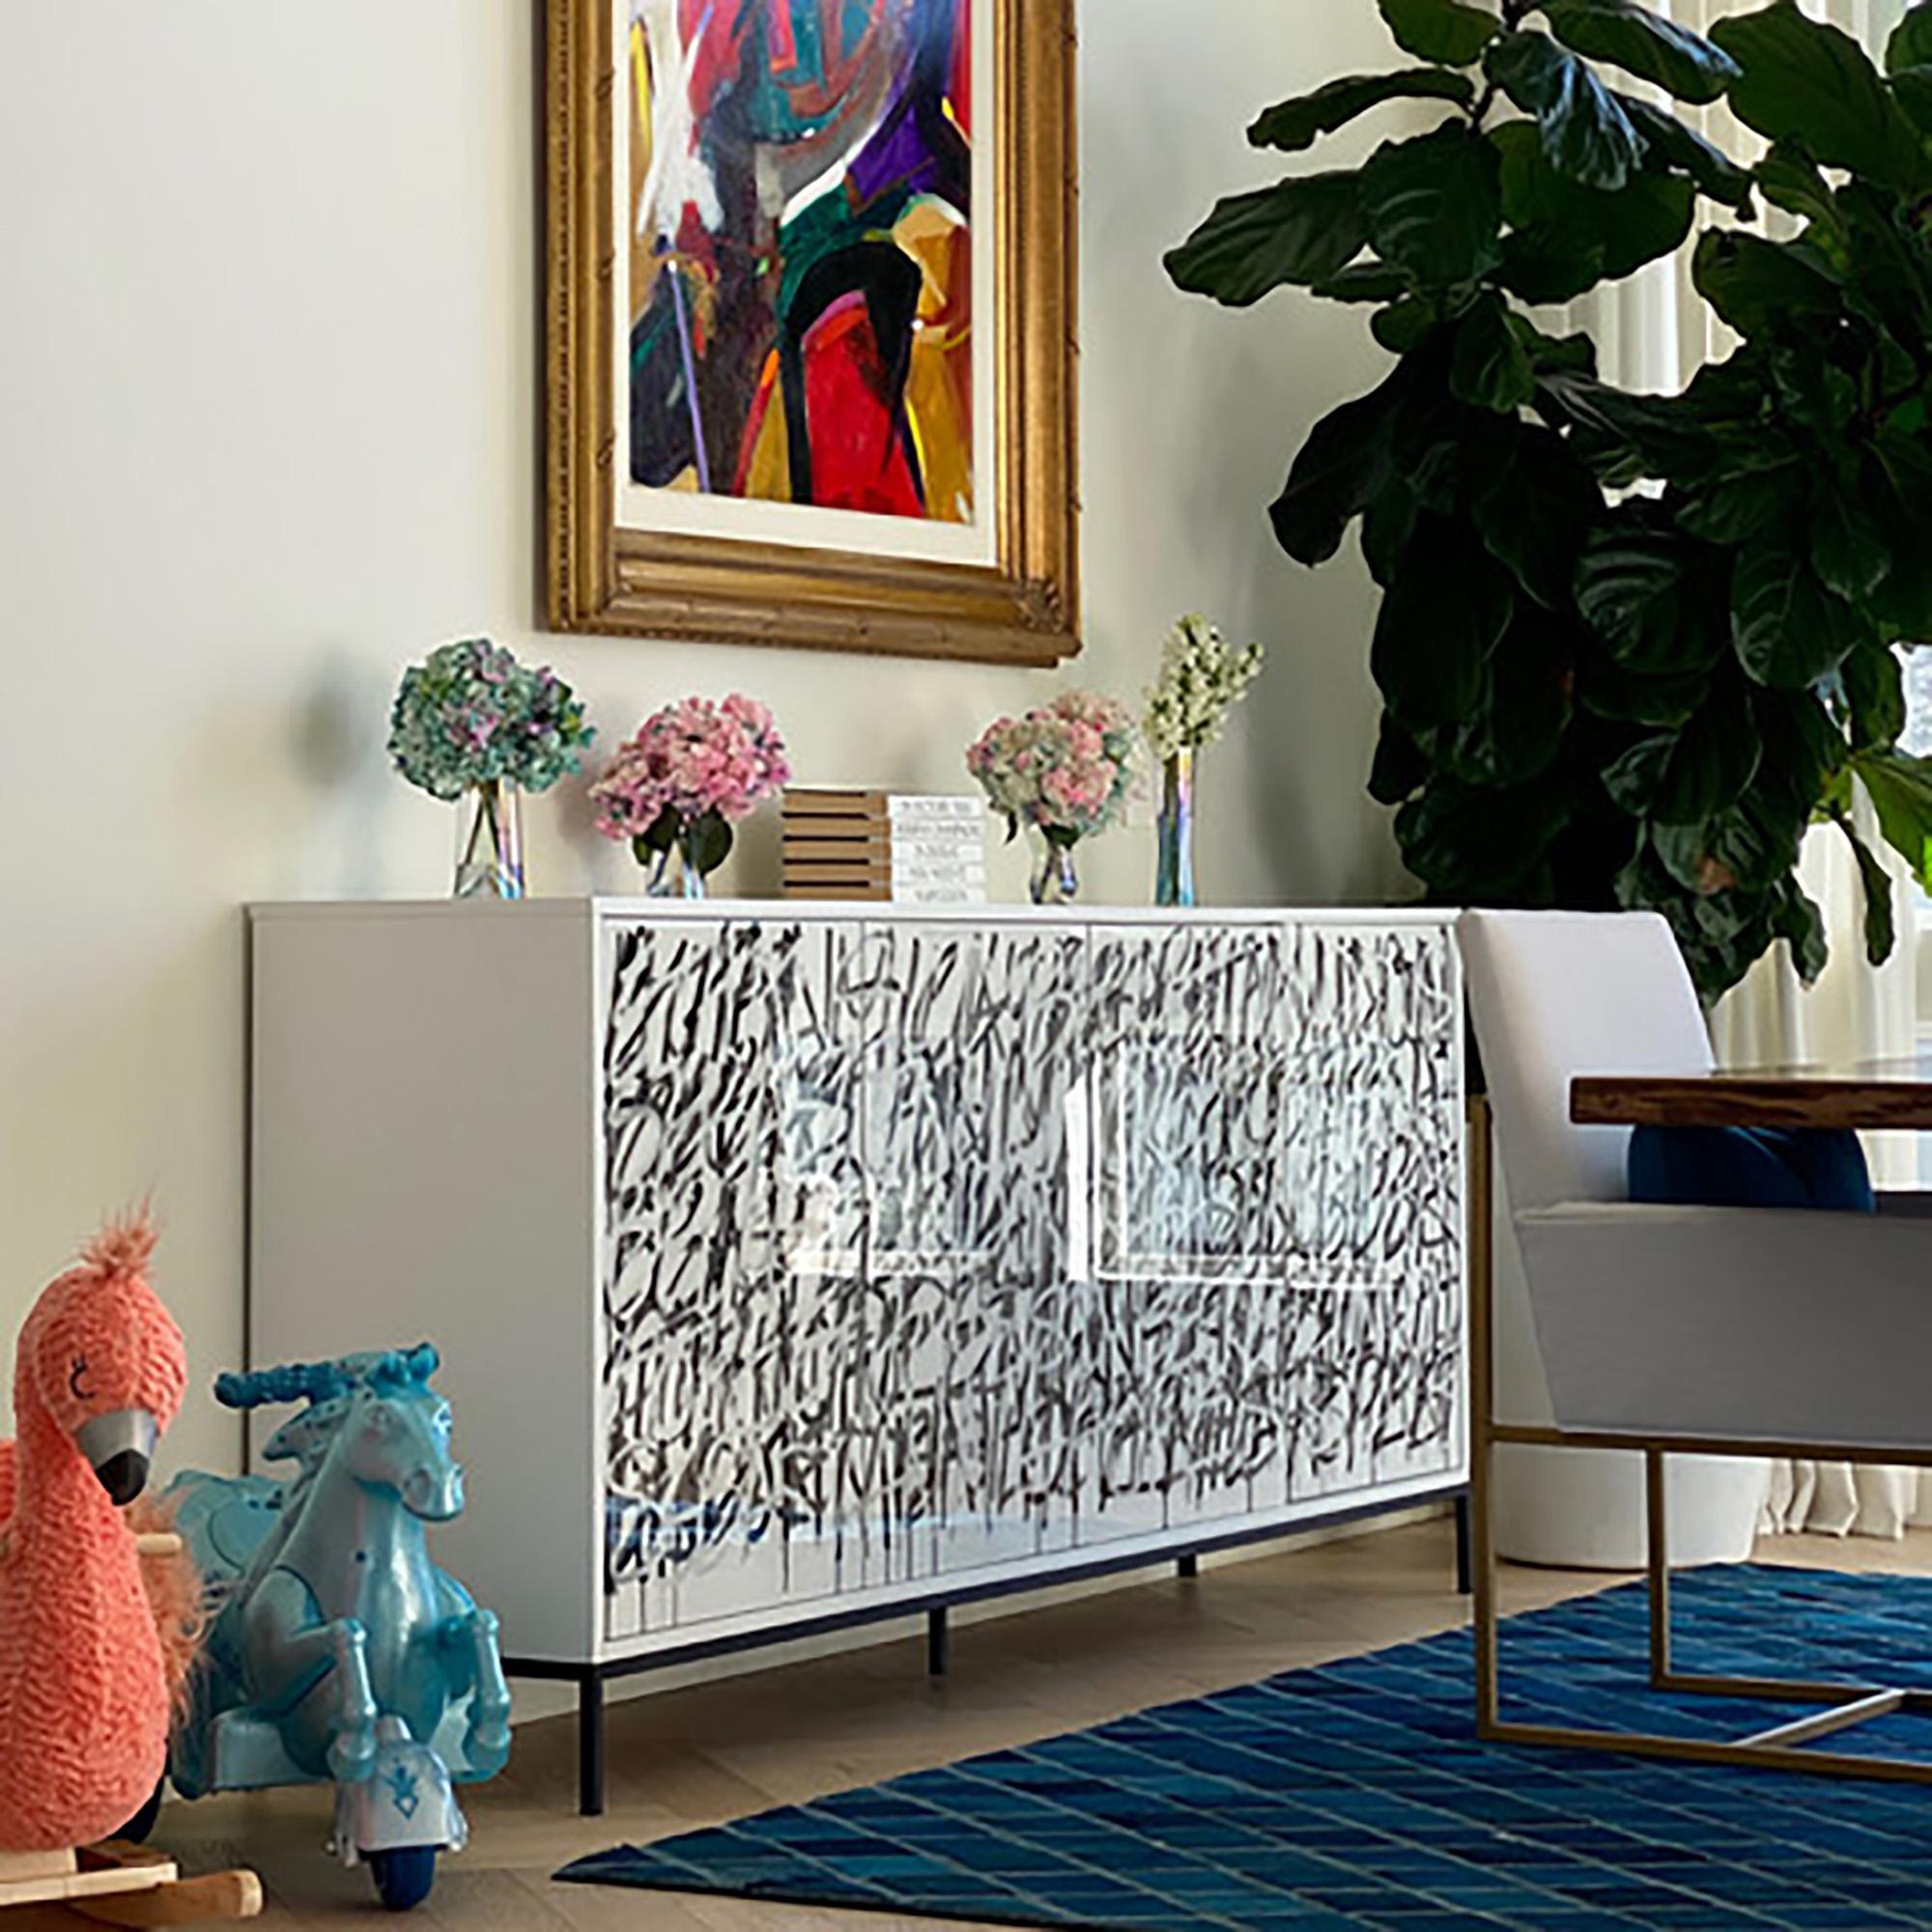 Contemporary White Graffiti Credenza by Morgan Clayhall, mix media artwork on doors For Sale